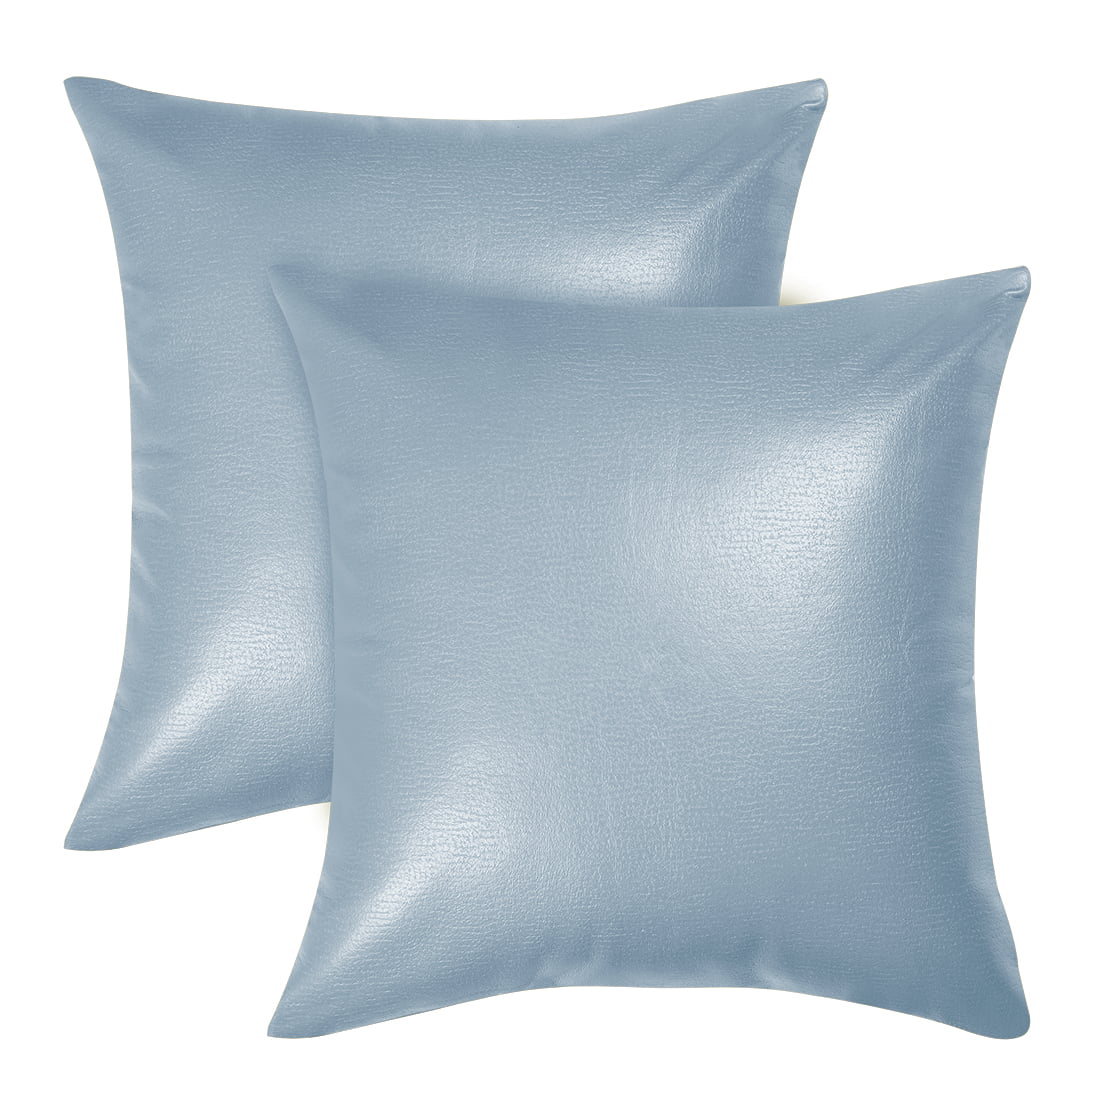 PiccoCasa Faux Leather Solid Square Cushion Covers 18"x18", Pale Blue